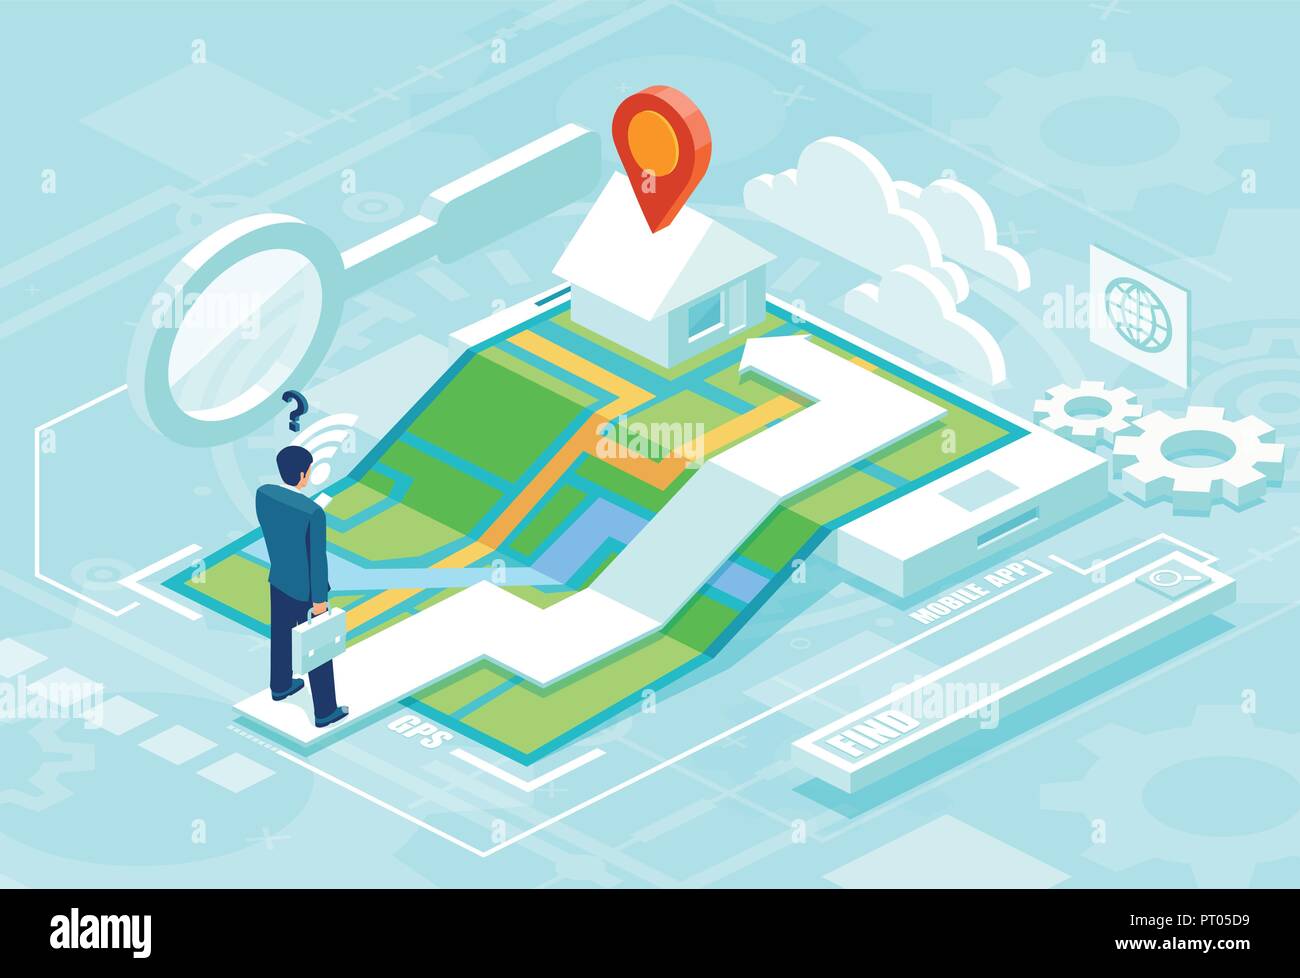 Online navigation concept in isometric vector. Businessman using smartphone application map to find his destinaton Stock Vector